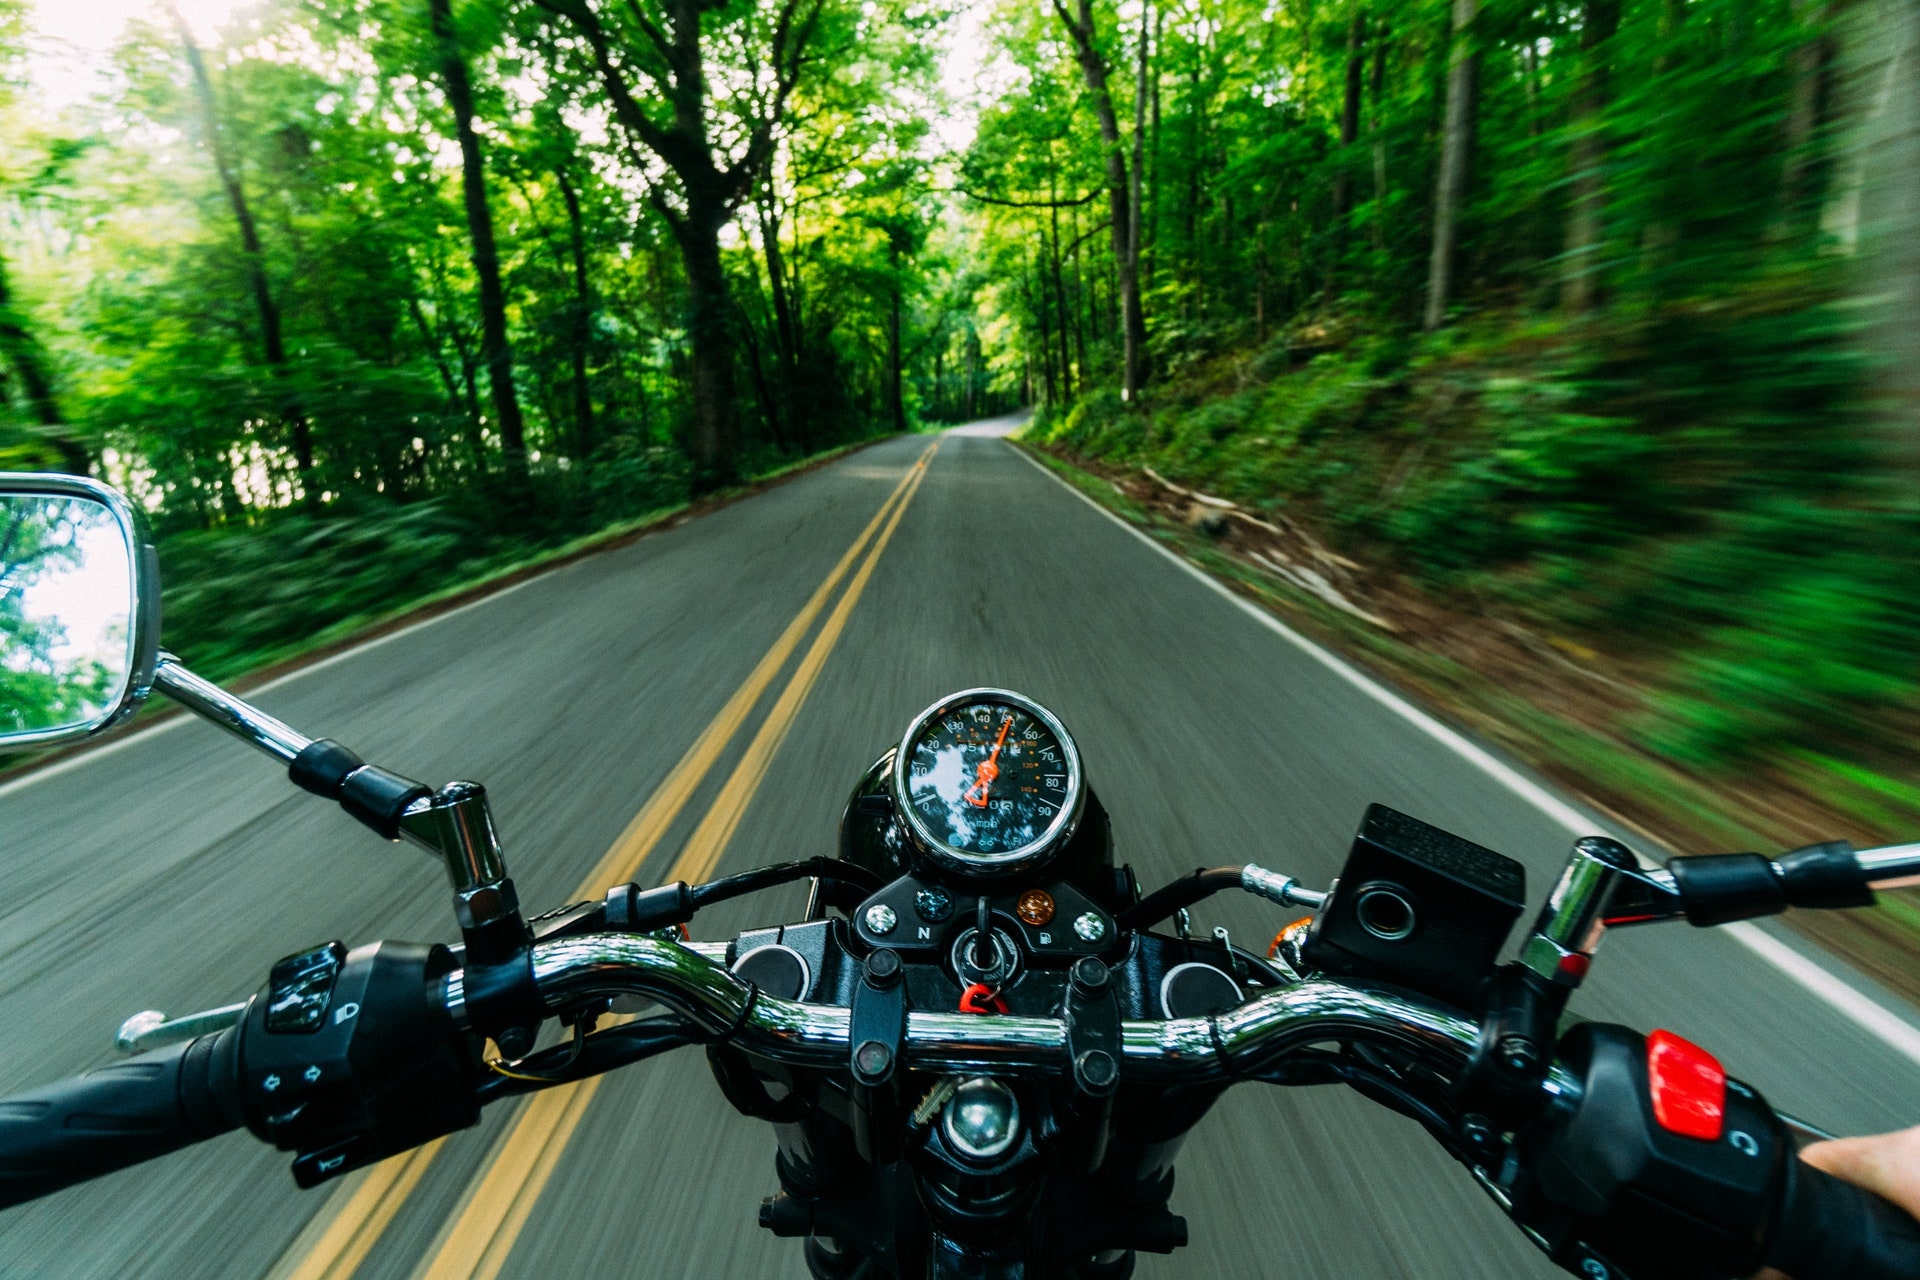 Motorcycle Direct Insurance